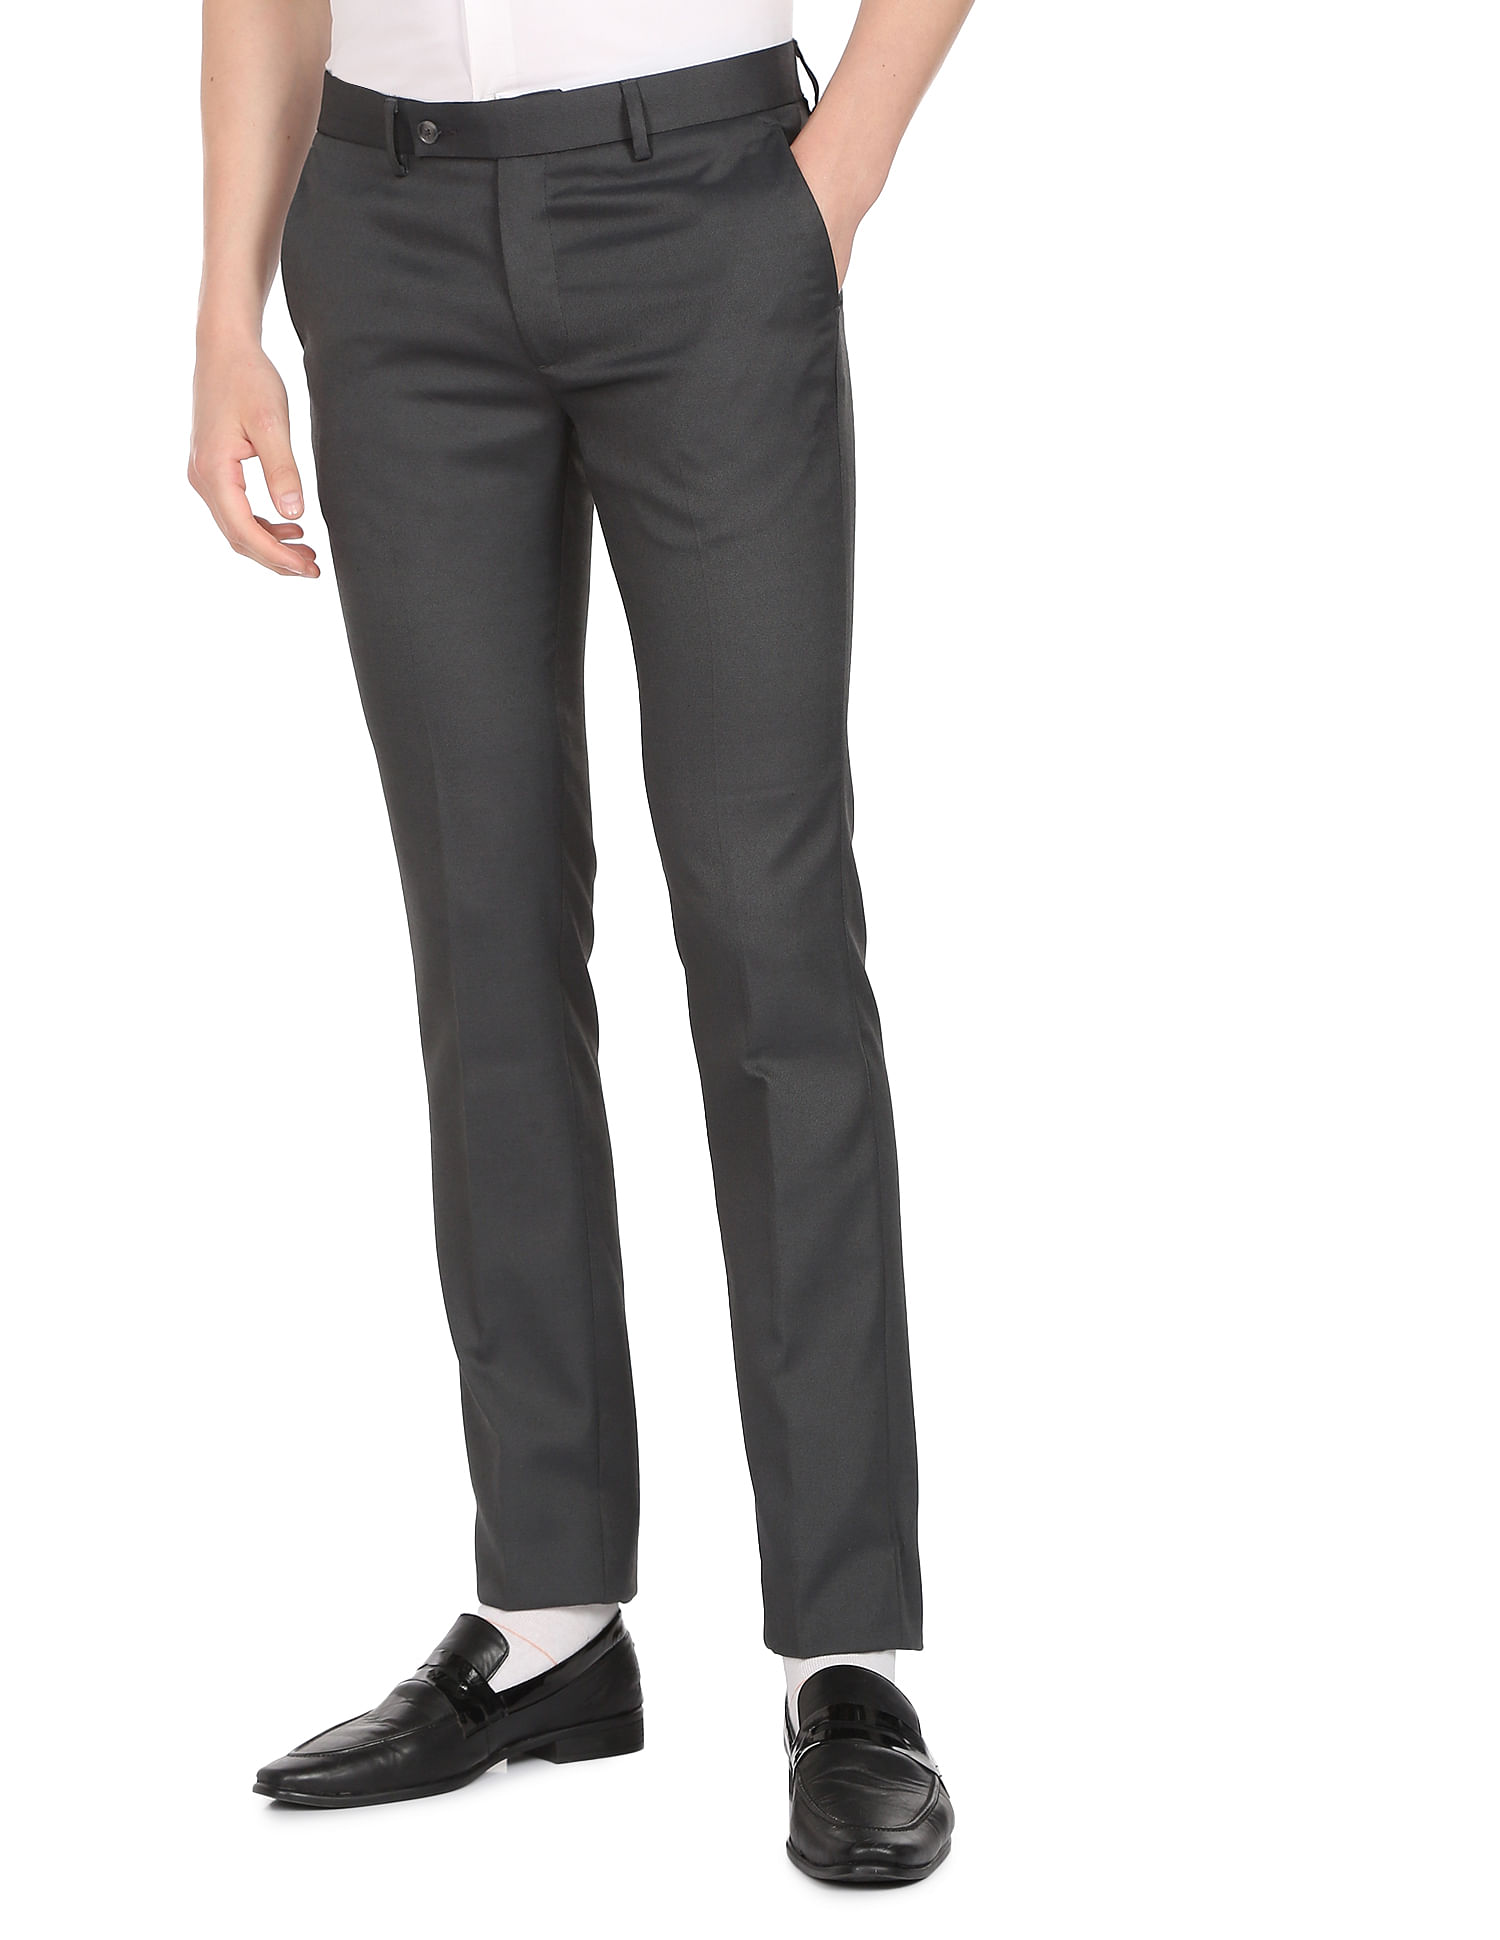 Buy blackberrys Lt. Grey Coloured Mens Trousers (Size: 36)-NL-Rogue # Grey  at Amazon.in